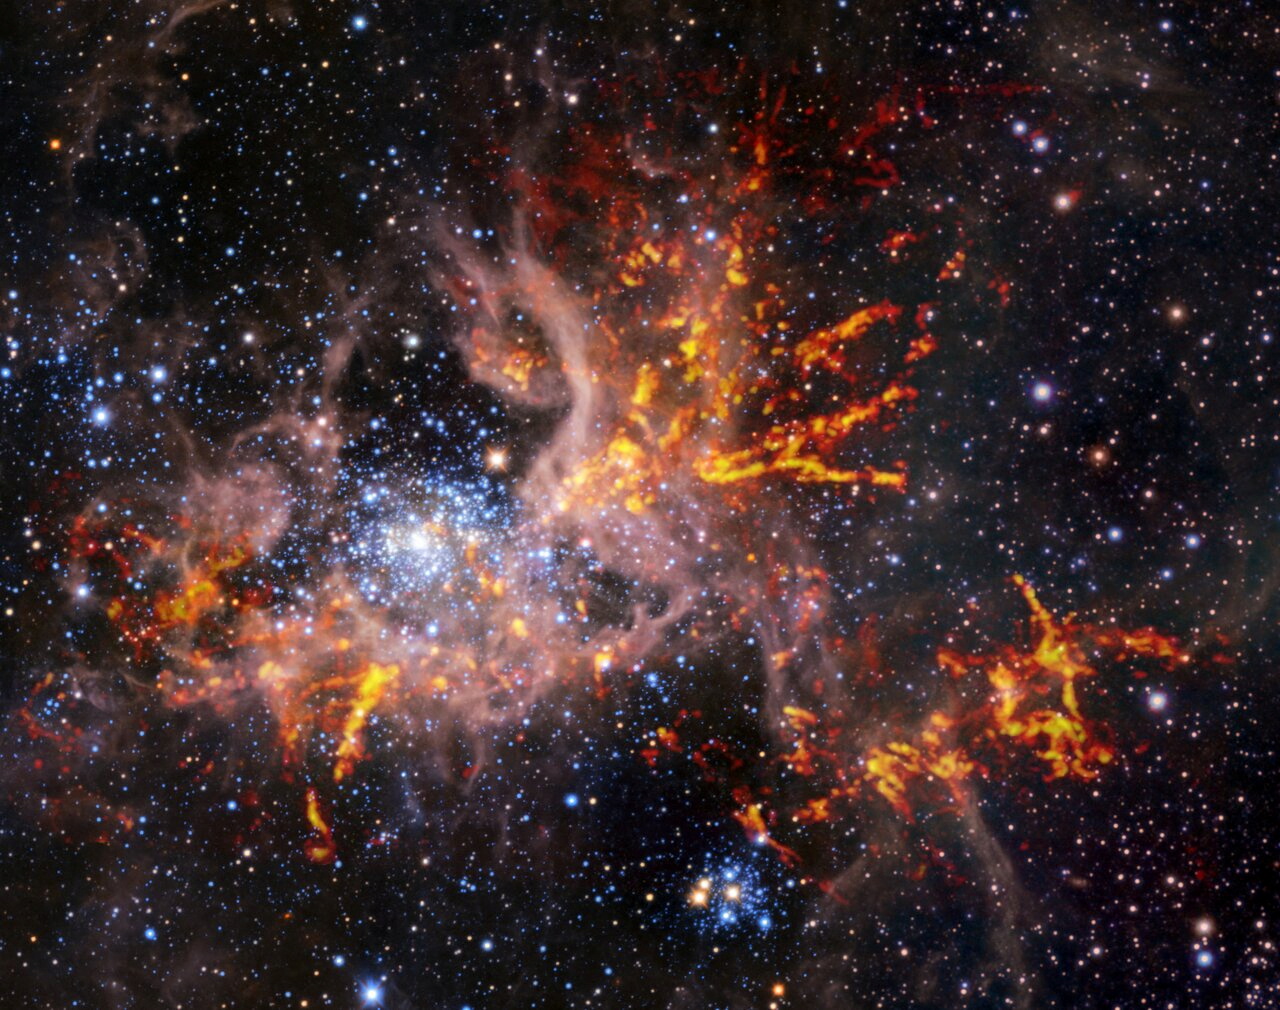 Infrared composite image shows the star-forming region 30 Doradus, known as the Tarantula Nebula